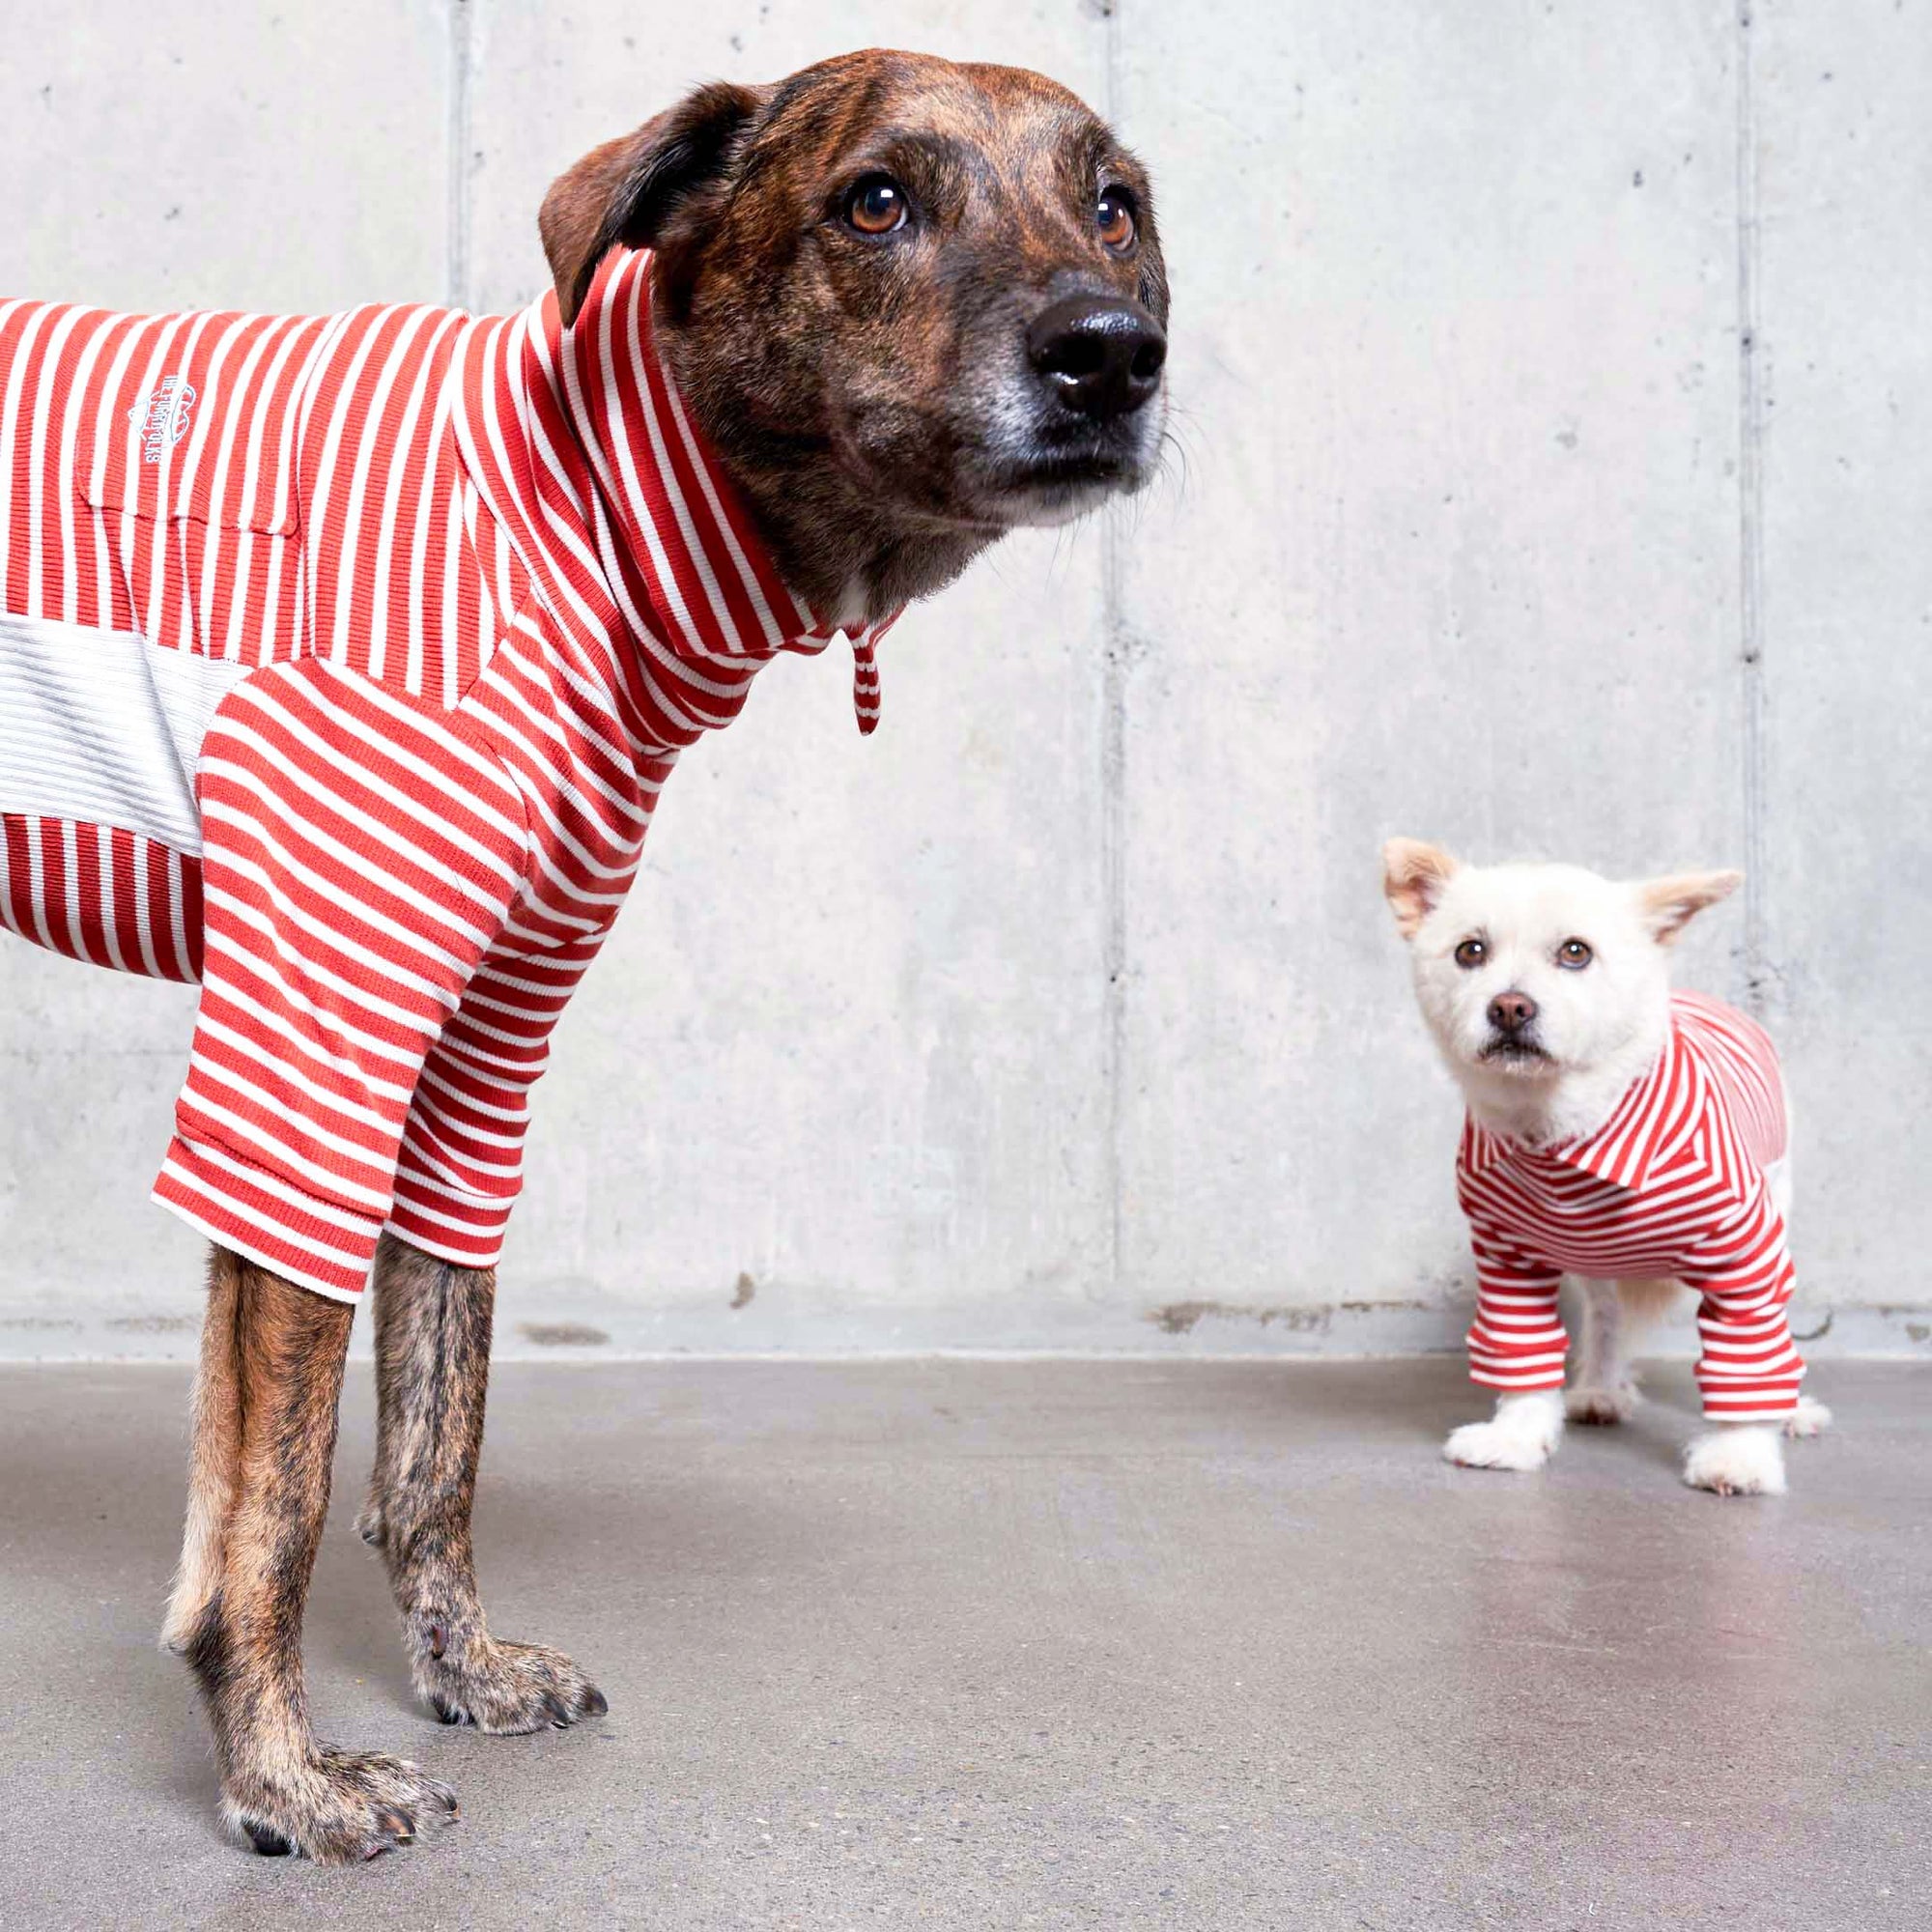 A brindle-coated dog in the foreground wearing a red and white striped turtleneck sweater gazes to the side, while a small white dog in a matching sweater stands in the background, looking towards the camera, both against a concrete wall backdrop.